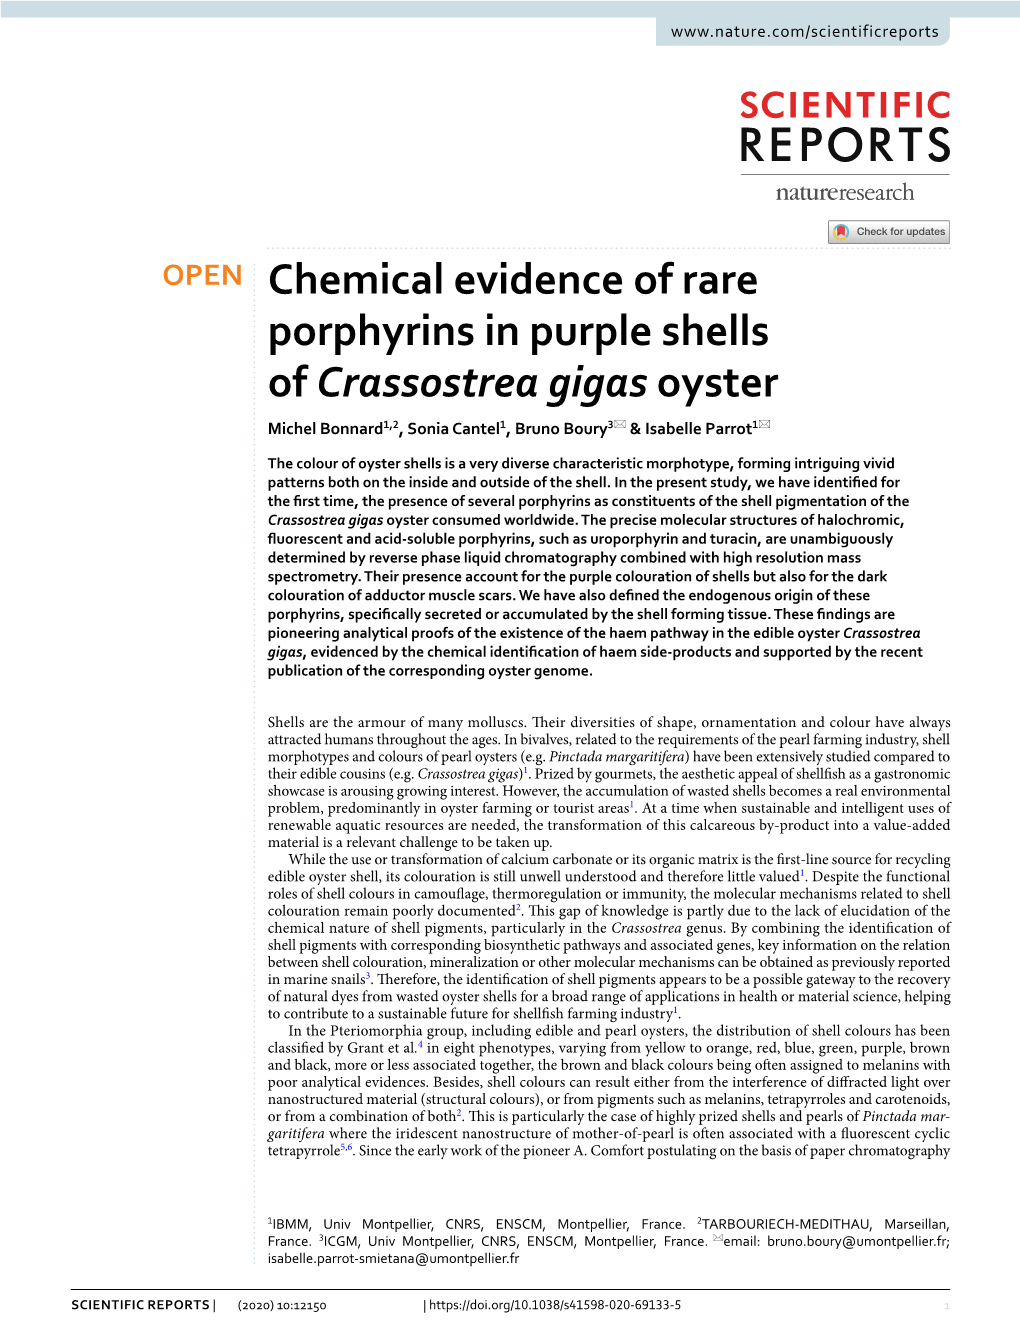 Chemical Evidence of Rare Porphyrins in Purple Shells of Crassostrea Gigas Oyster Michel Bonnard1,2, Sonia Cantel1, Bruno Boury3* & Isabelle Parrot1*